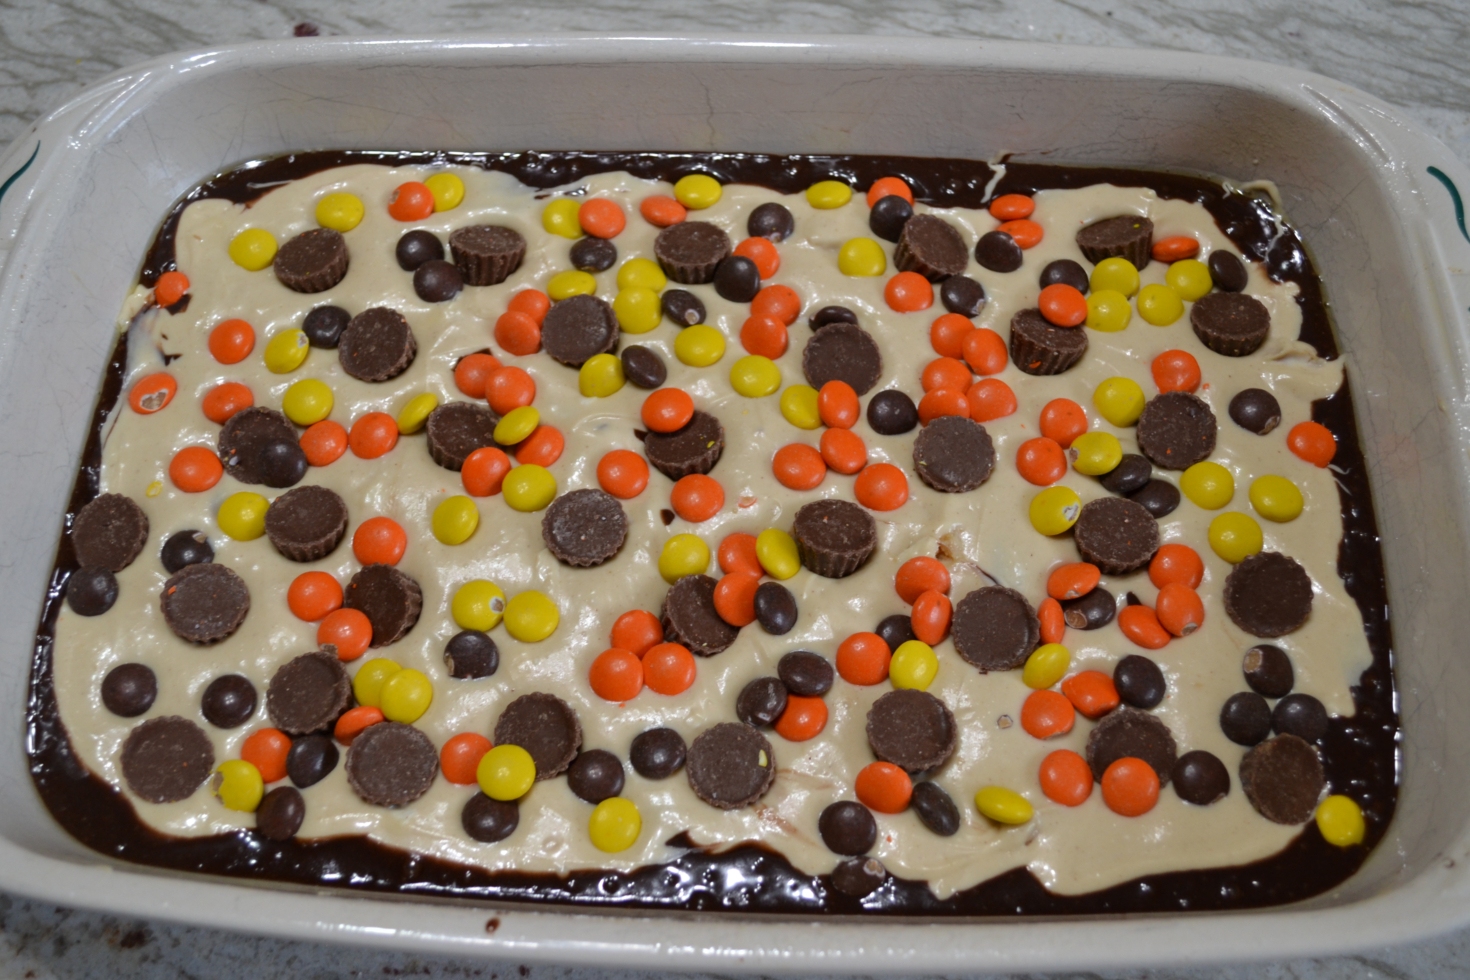 Extreme Peanut Butter Cream Cheese Brownies are extreme because they are a decadent brownie dessert, loaded with a peanut butter cream cheese layer, and then topped with a bag of Reese’s Baking Cups and Reese’s Pieces Candies